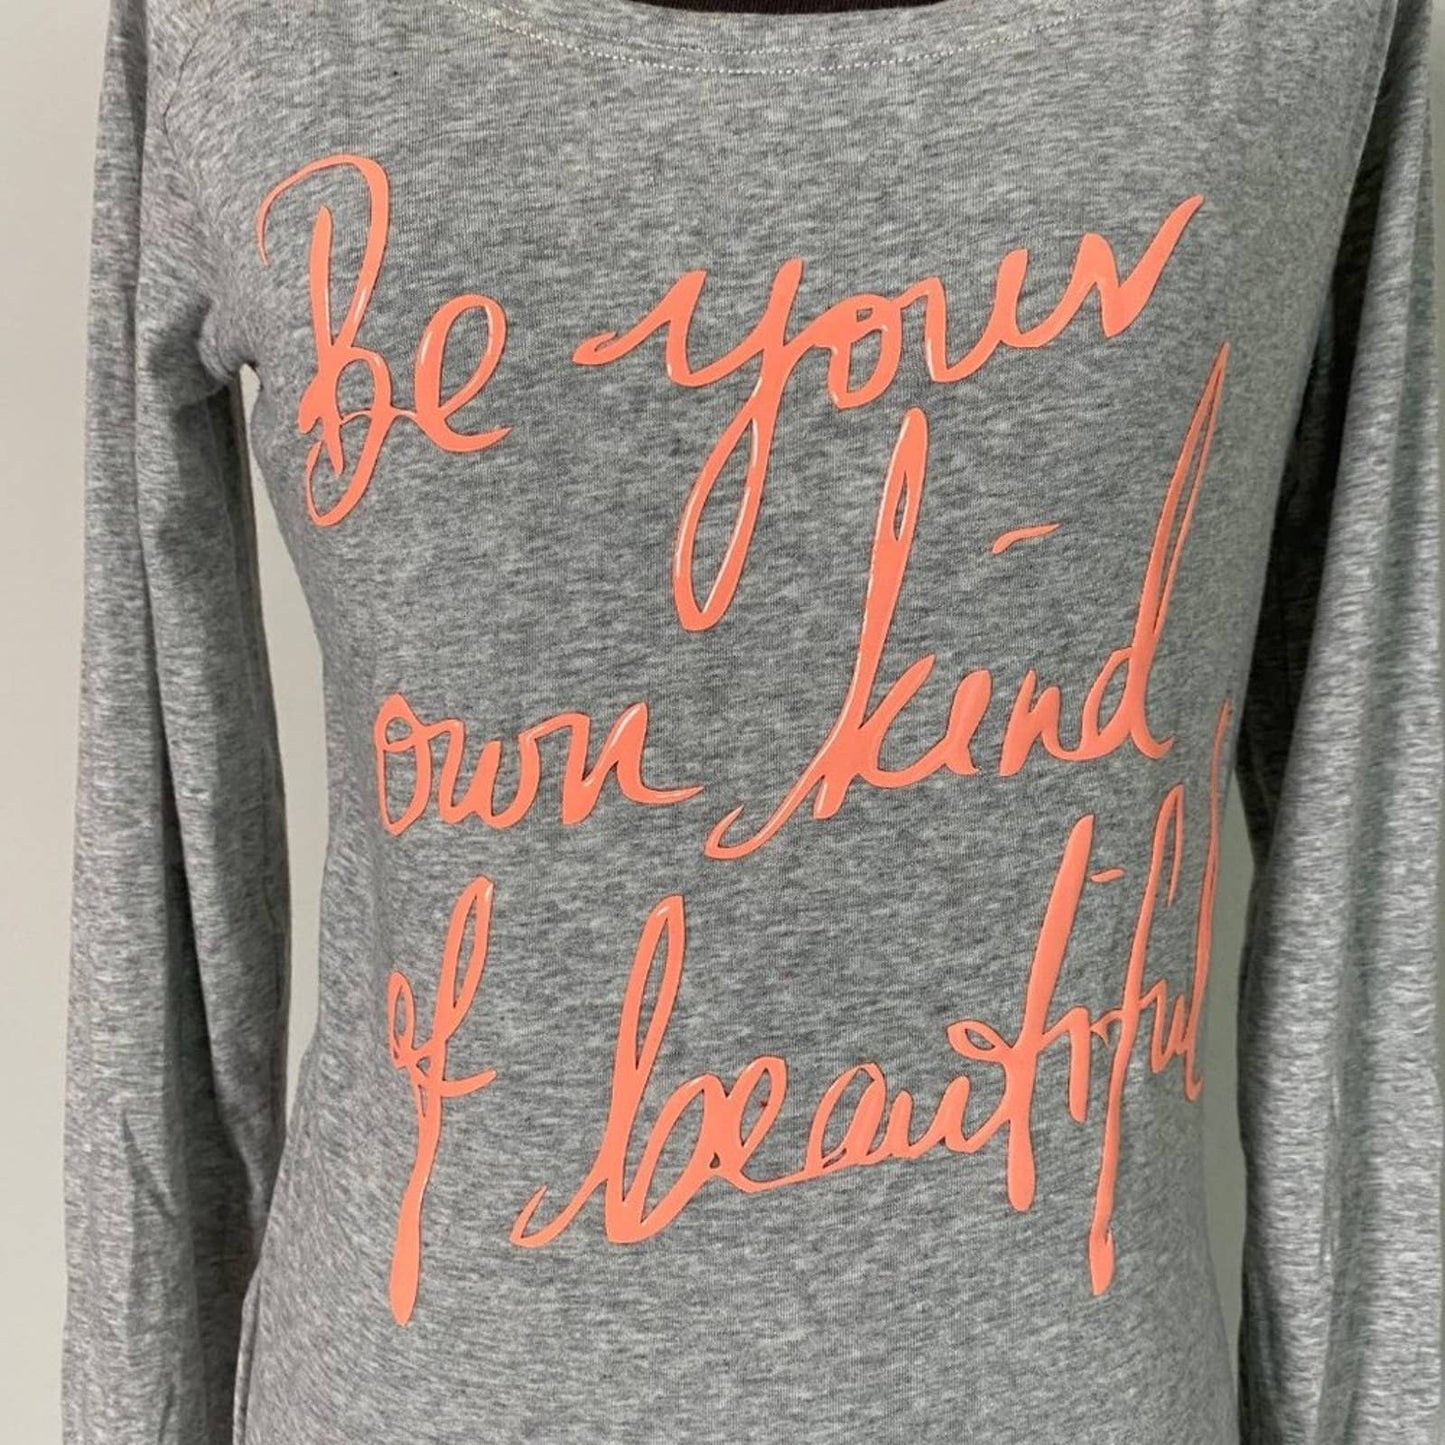 Lorna Jane Life sz XS Cotton long sleeve "Be your own kind of beautiful" shirt